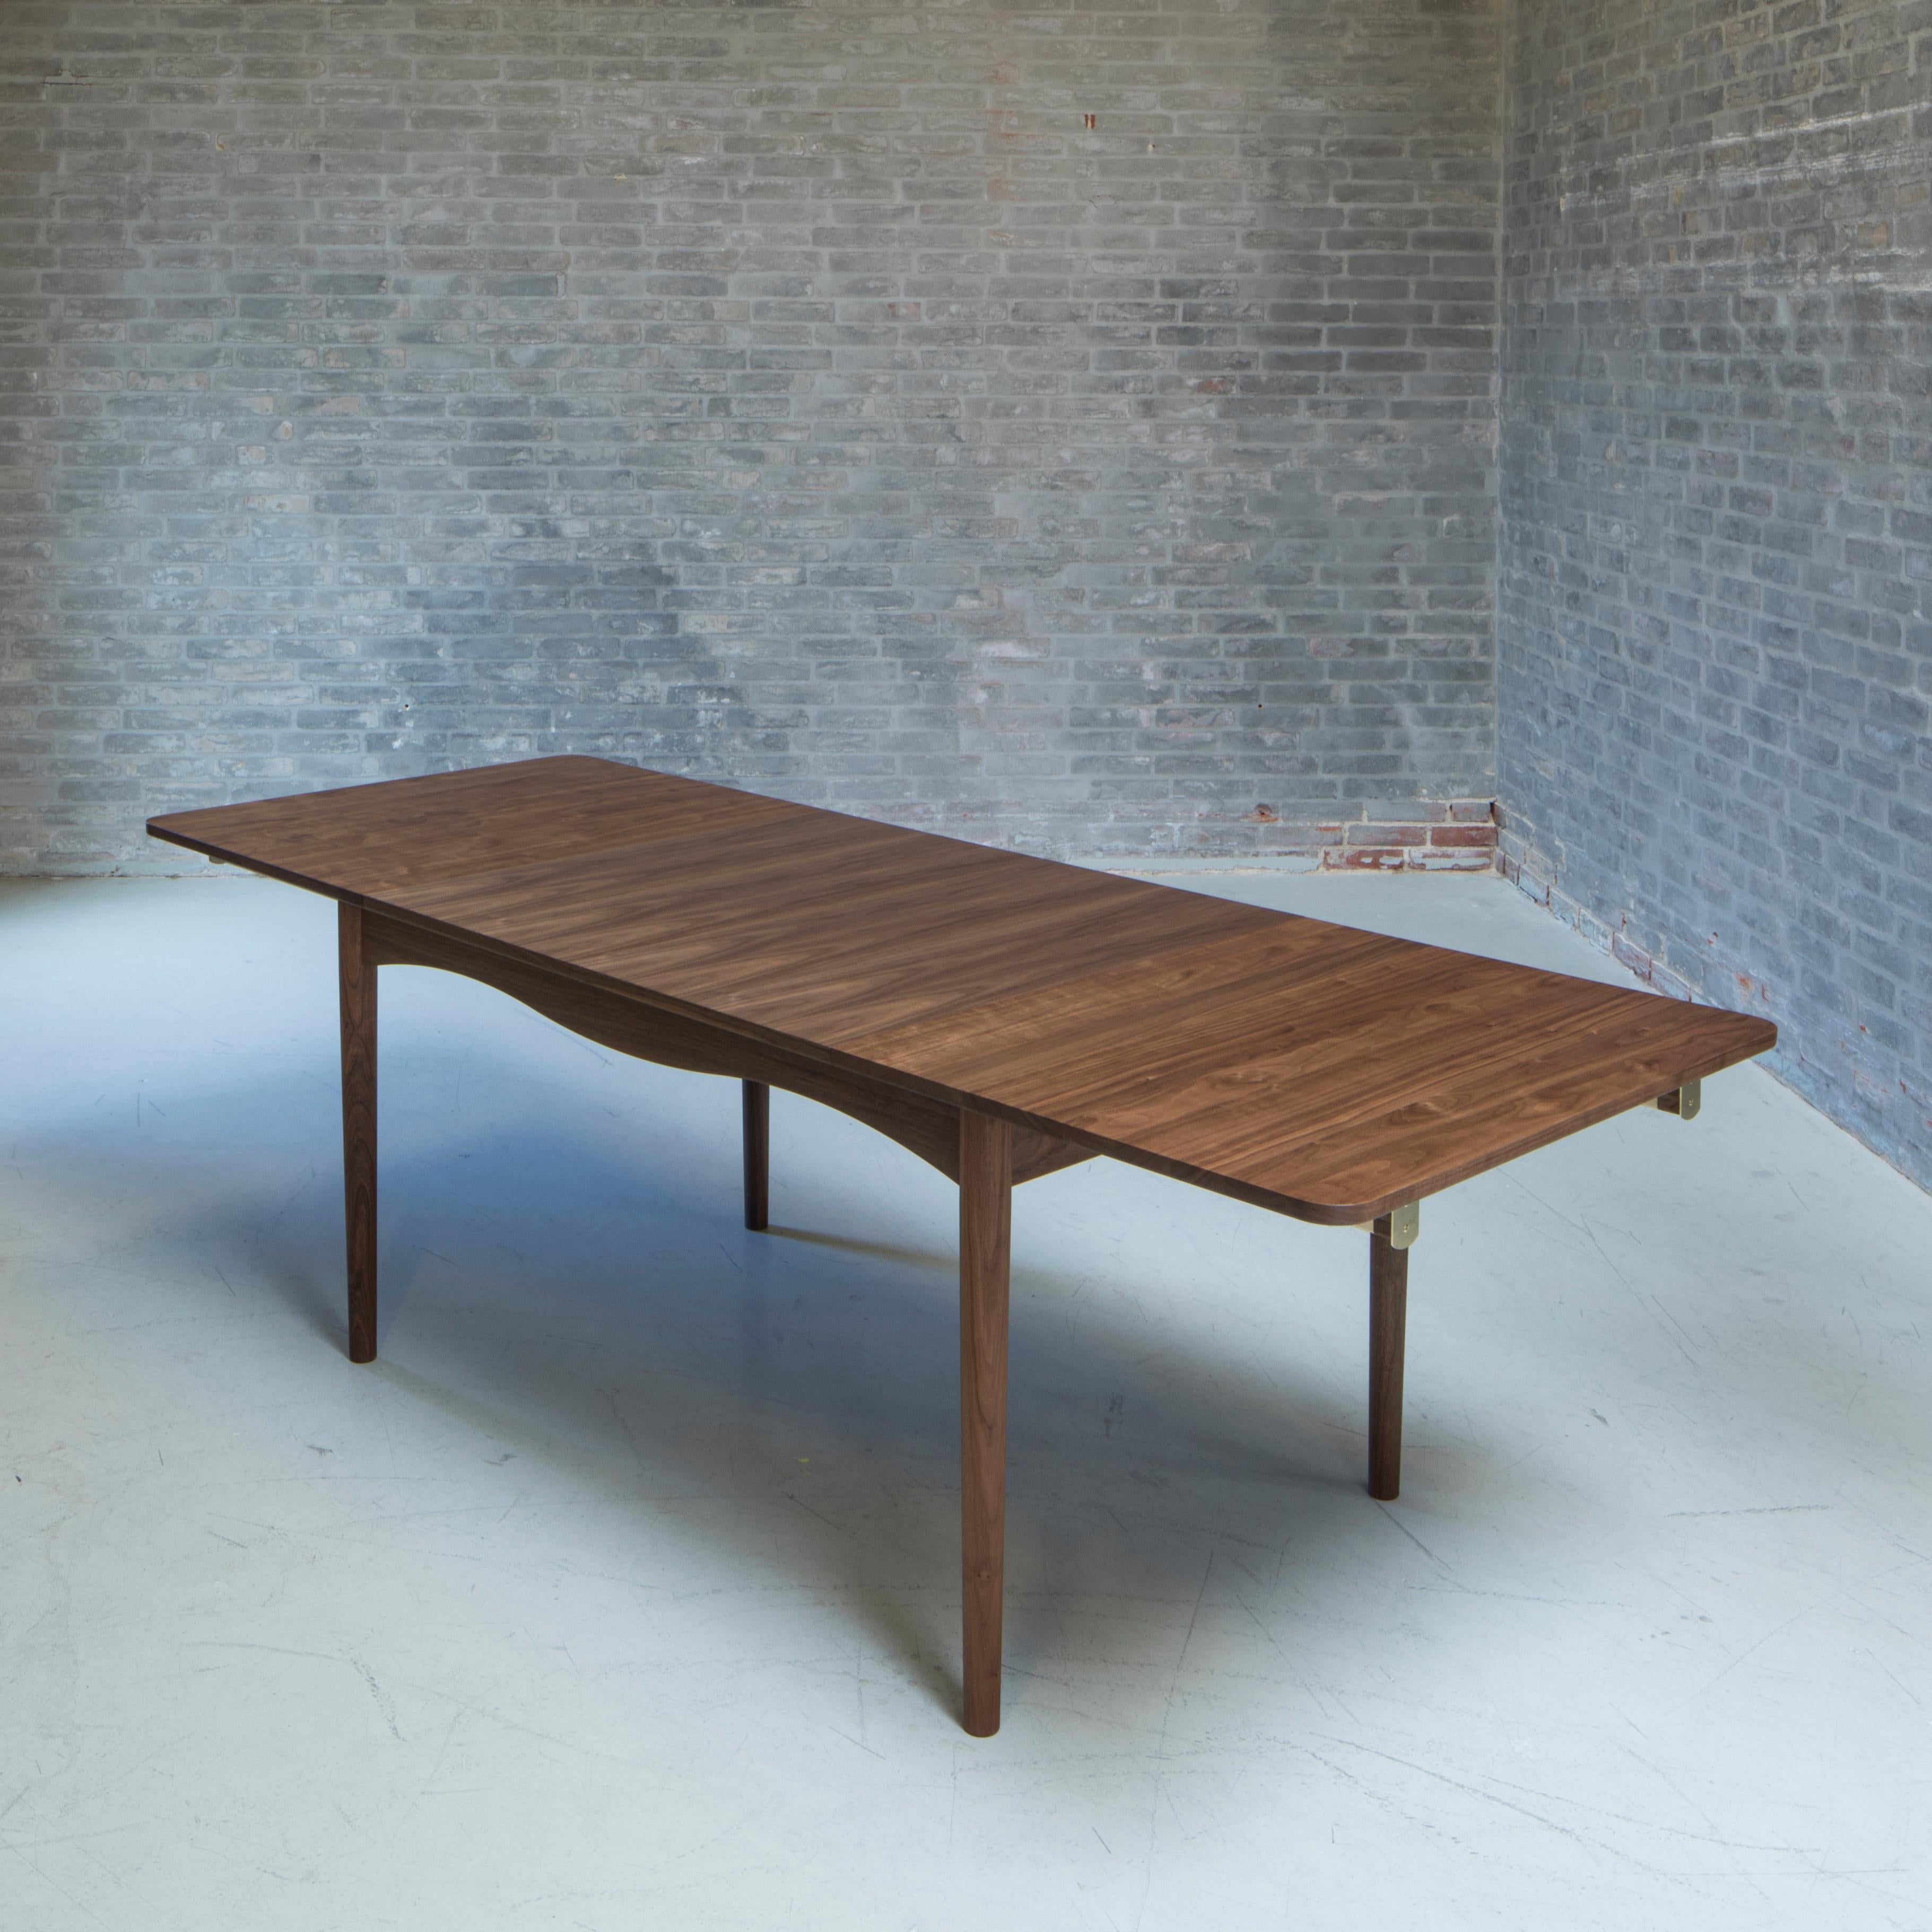 Table designed by Finn Juhl in 1948, relaunched in 2019.
Manufactured by House of Finn Juhl in Denmark.

The table, which House of Finn Juhl today has been given special permission to name the Bovirke Table, was presented at the exhibition 